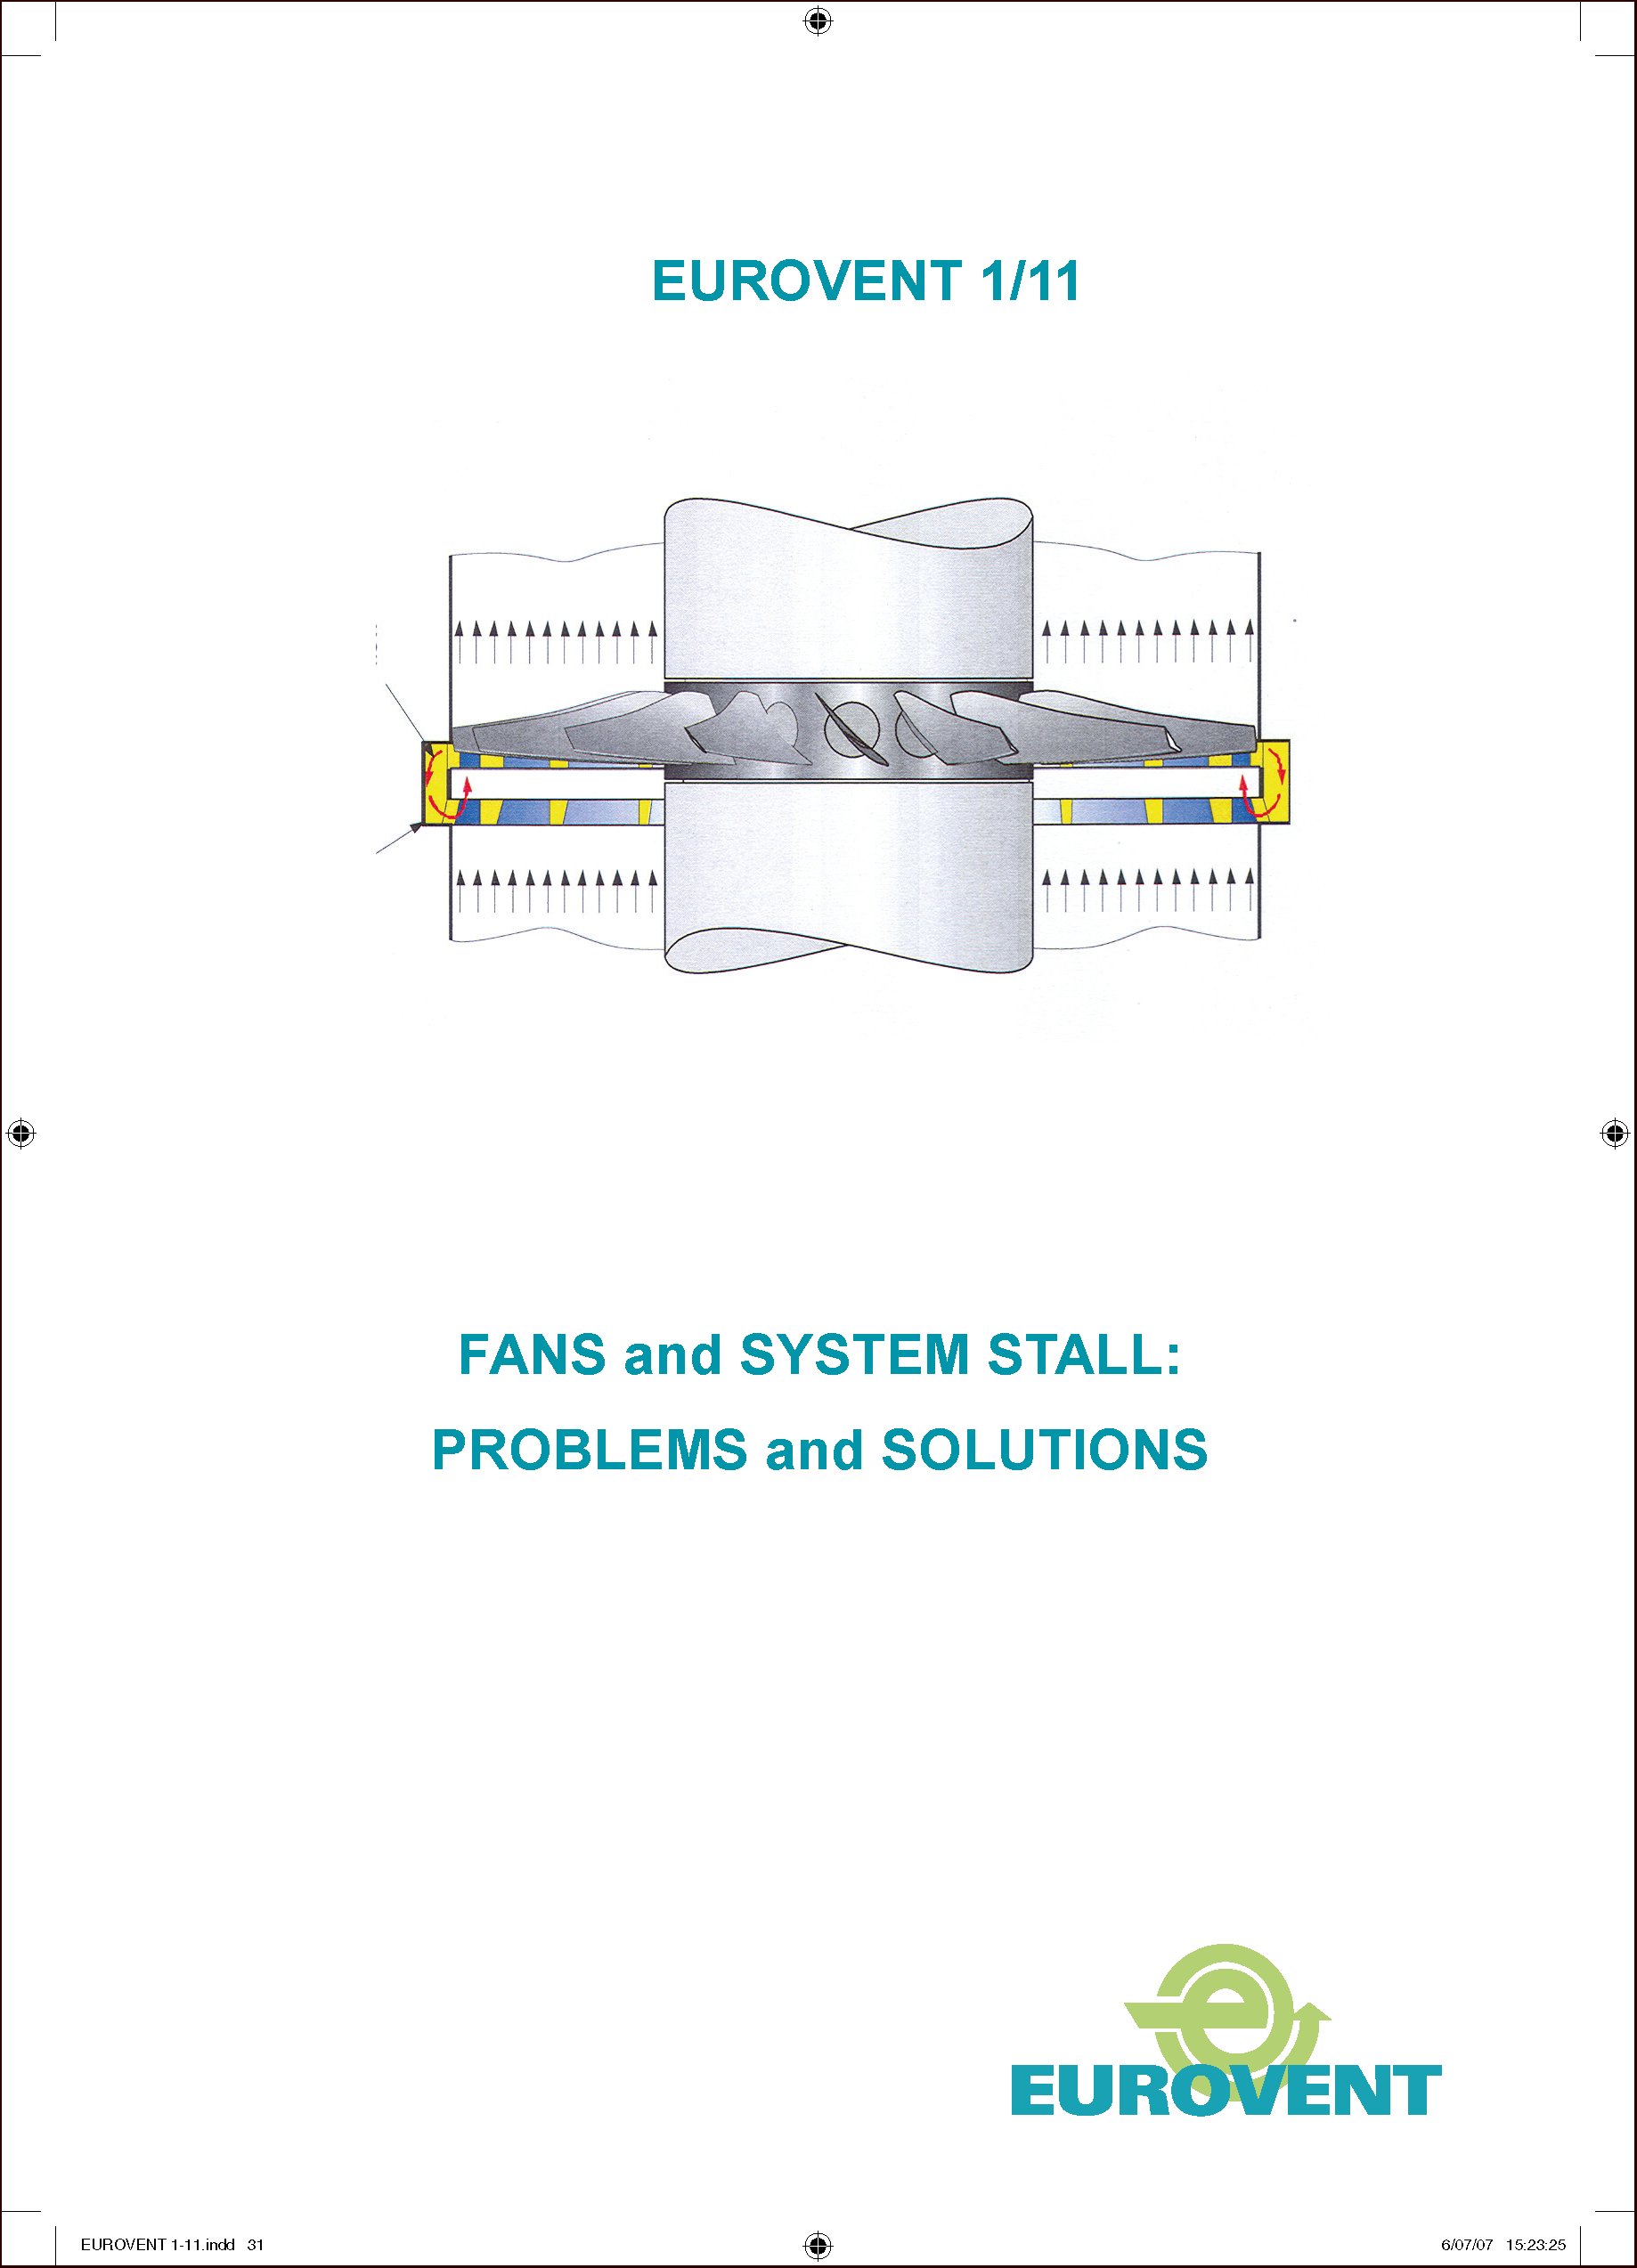 2007 - Fans and System Stall: Problems and Solutions